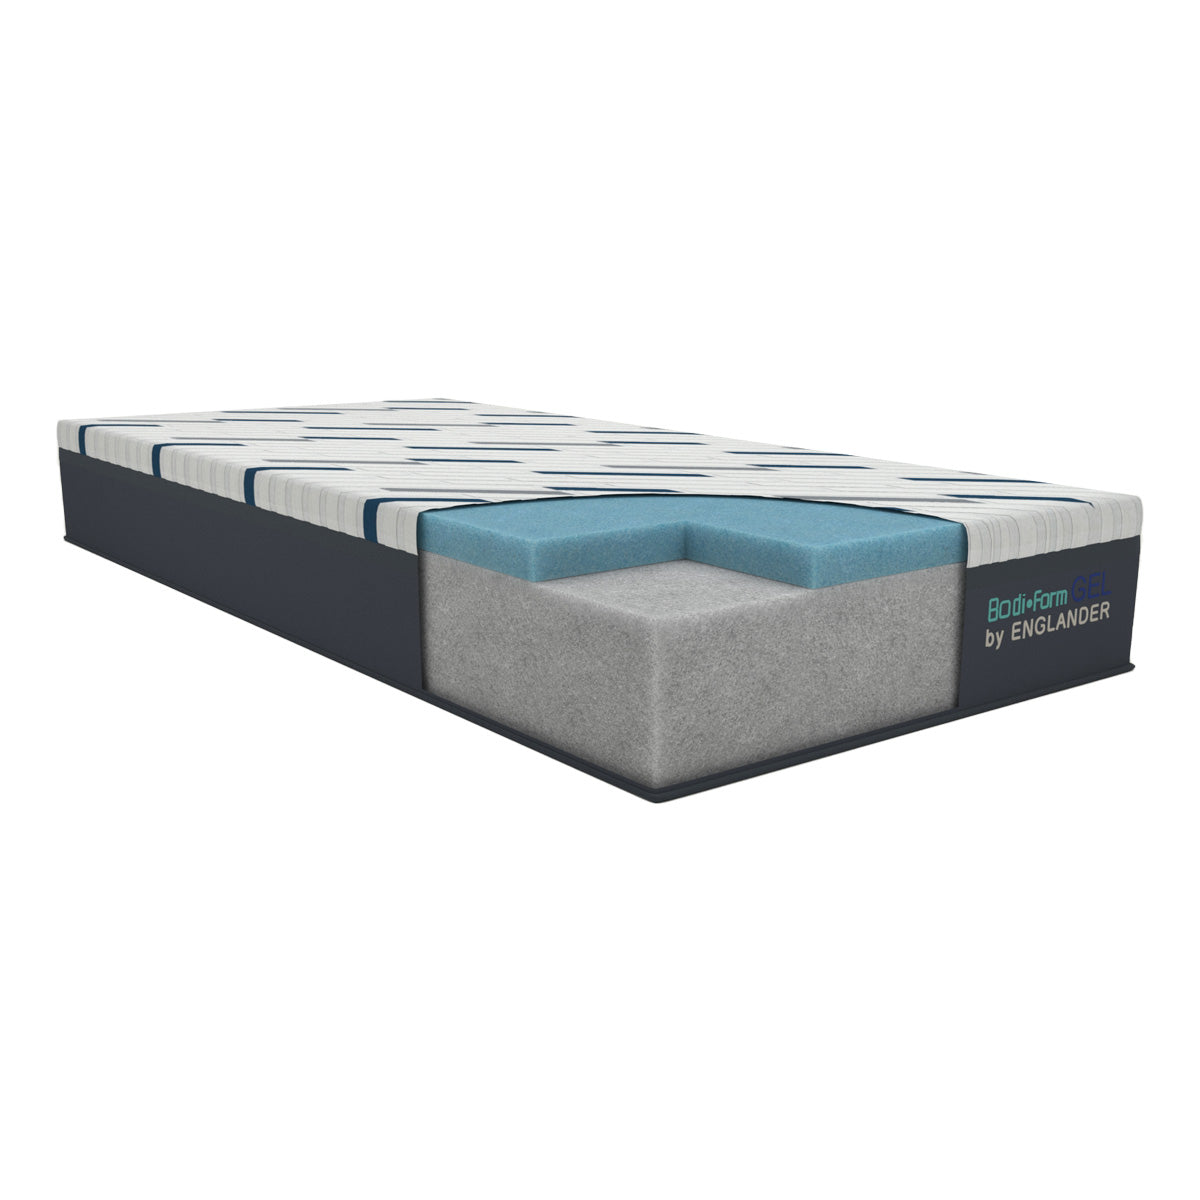 Bodiform Gel Mattress by Englander Image of the Materials used inside the Mattress